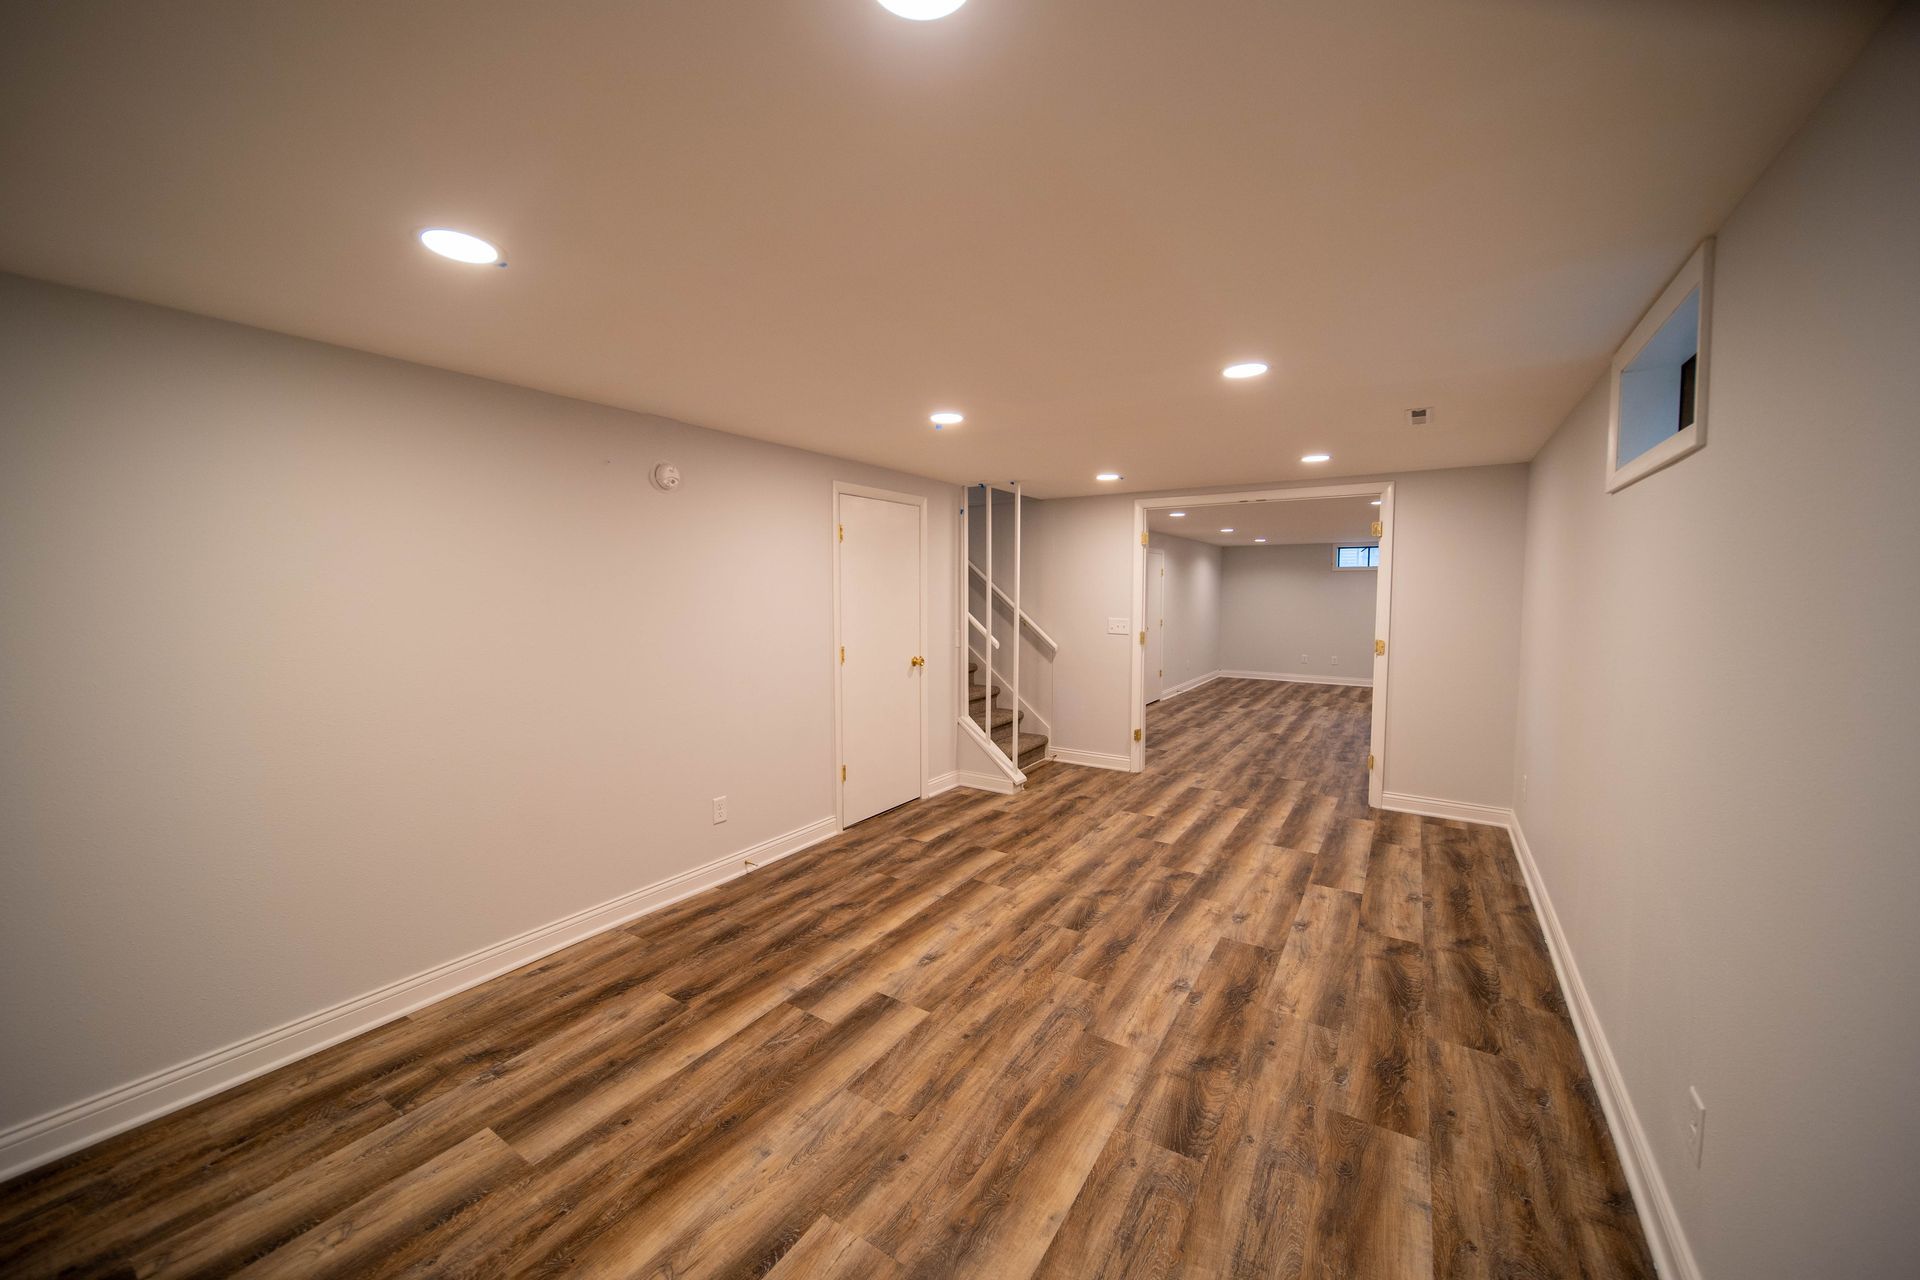 An empty basement with hardwood floors and white walls.